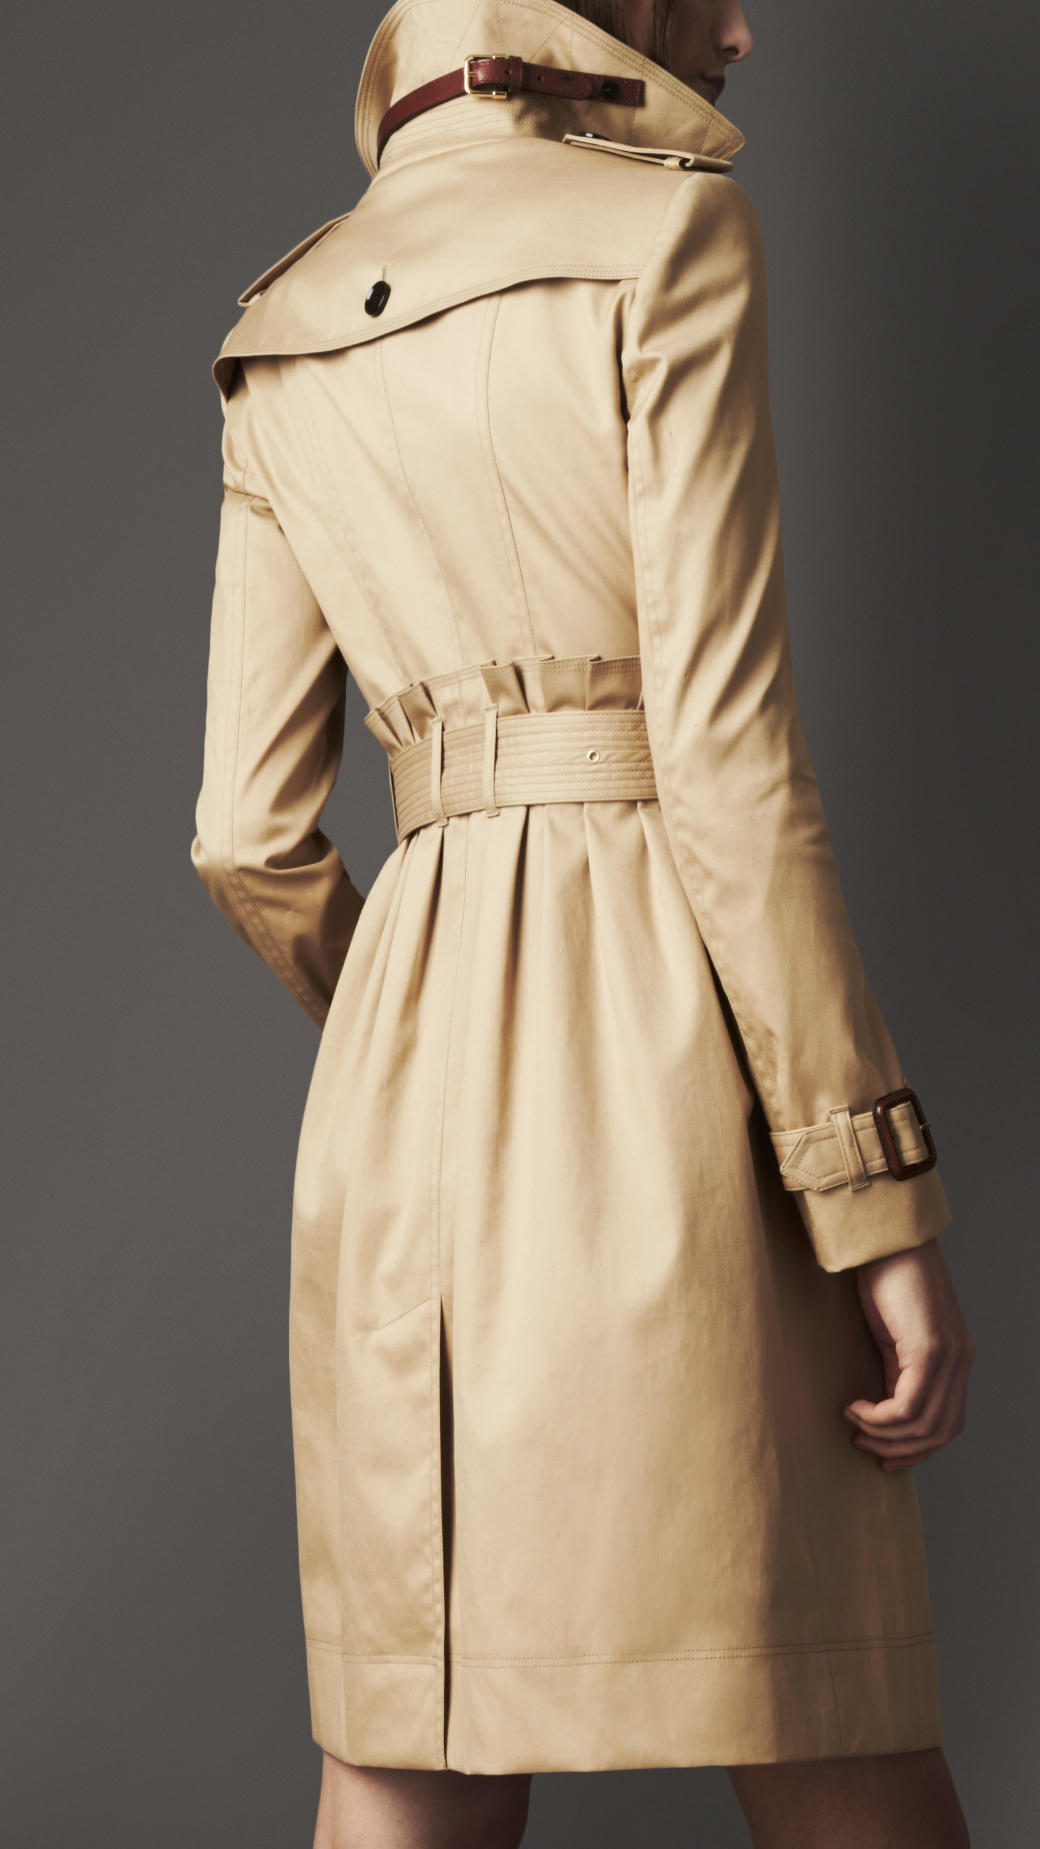 Lyst - Burberry Tuck Waist Trench Coat in Natural